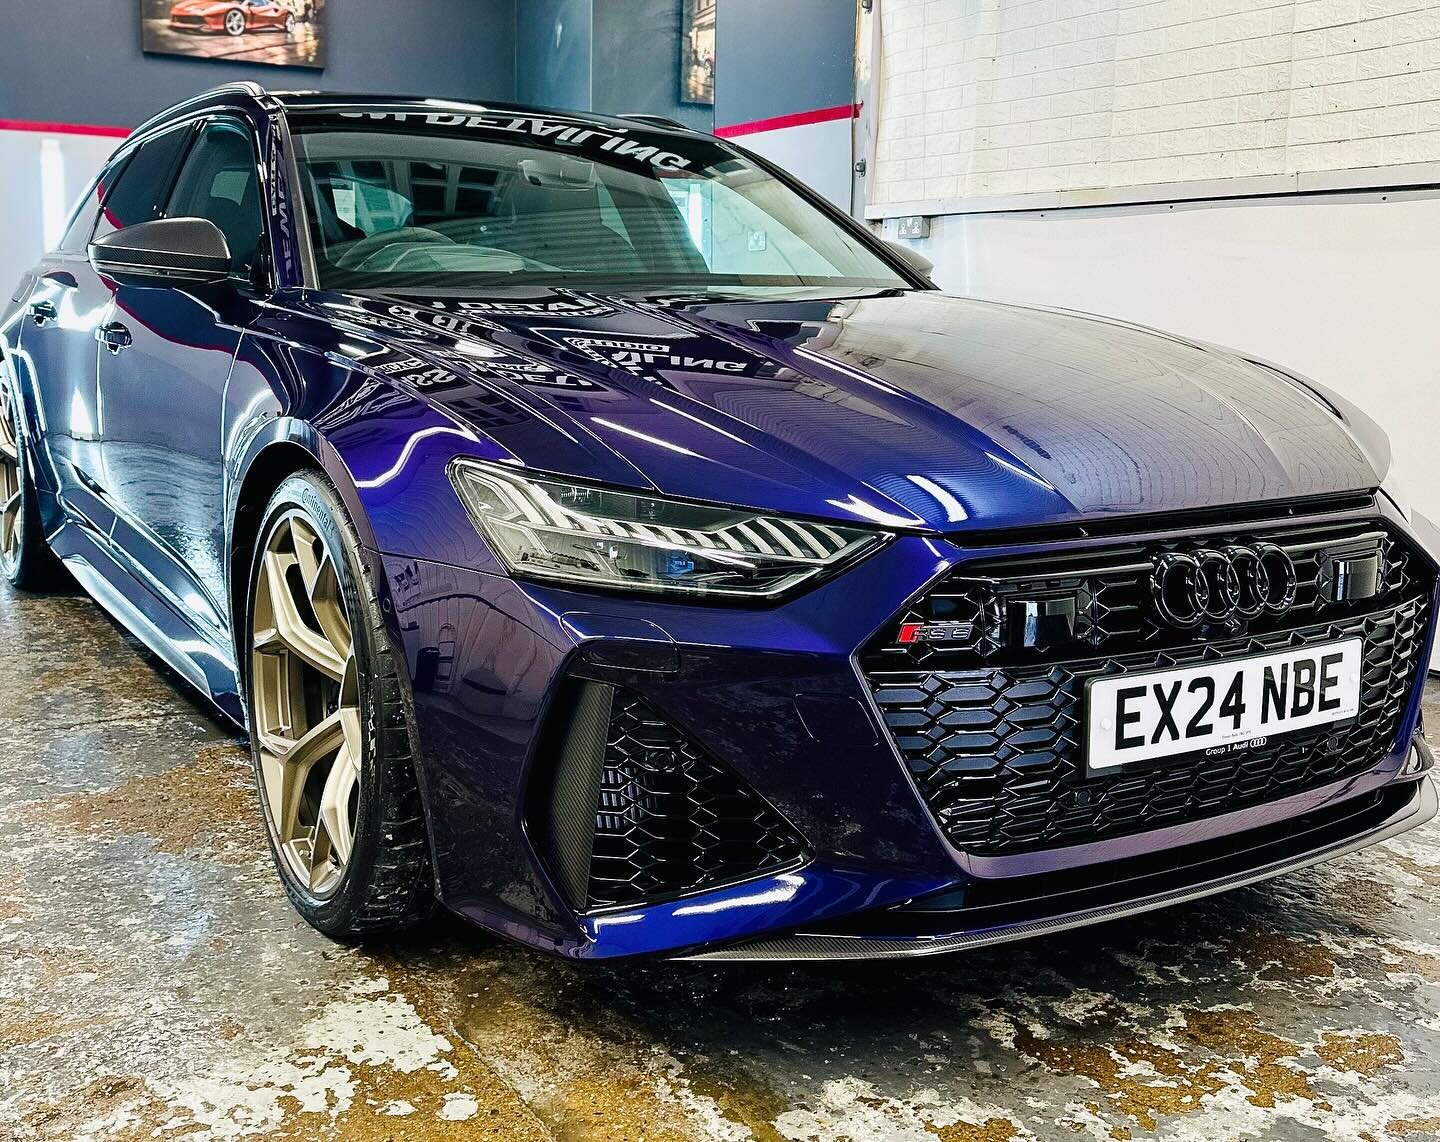 Brand New Audi RS6 Avant Paintwork Fully Perfected Prior to Multiple Layer of Gtechniq Ceramic Coating Application at our London Car Detailing Studio

Potentially PPF Soon 

Get in contact for the best service and the most competitive quote 

⬇️ Cont